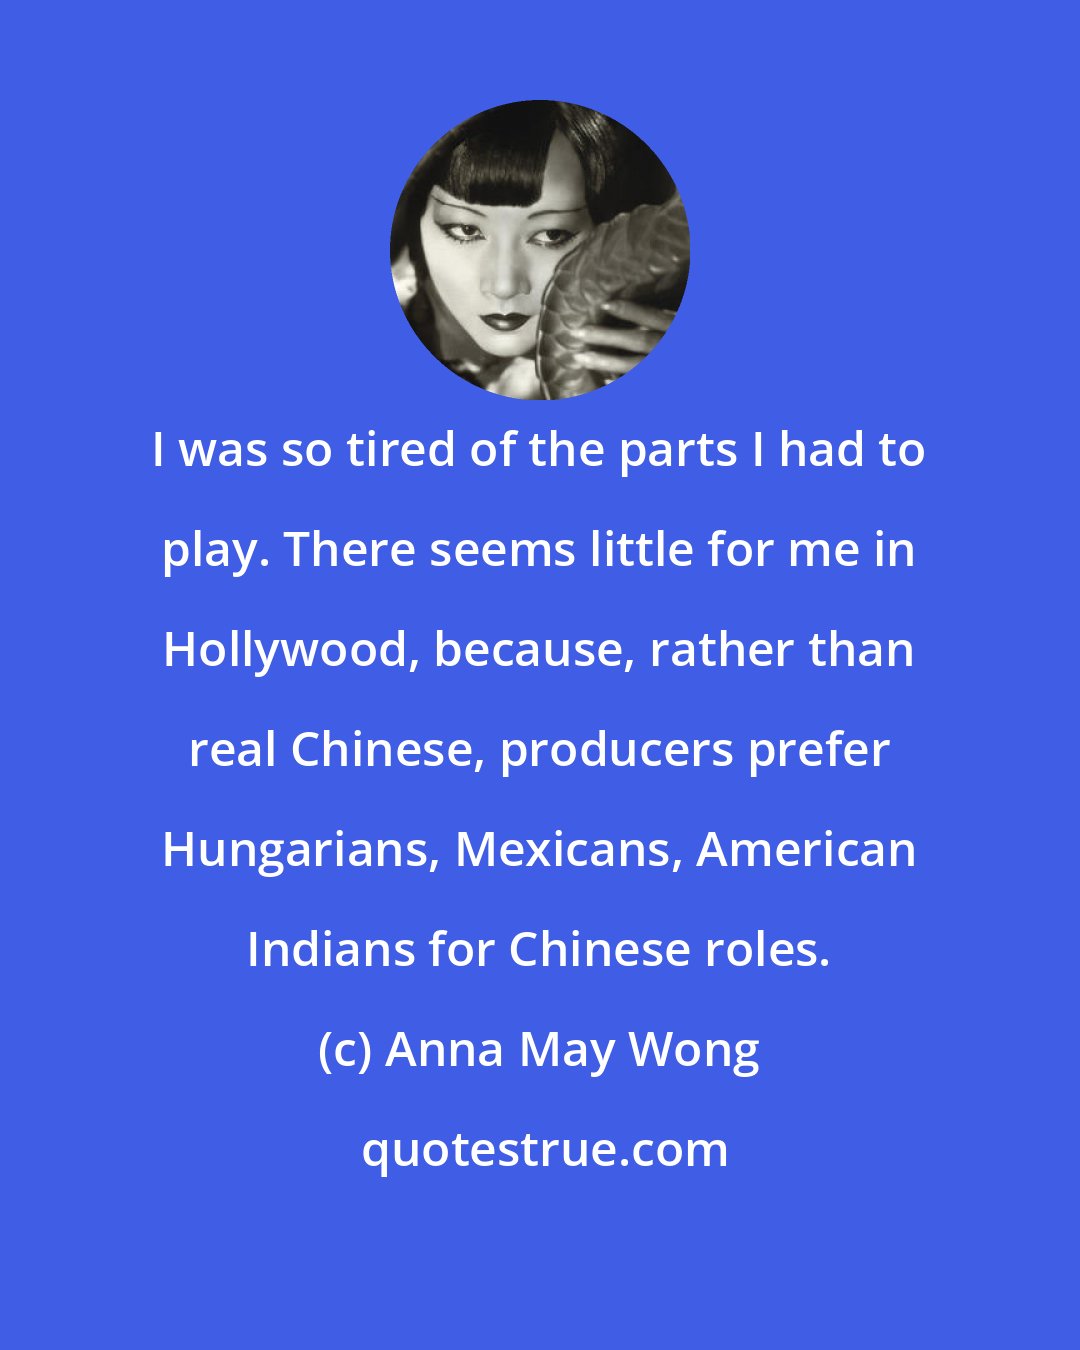 Anna May Wong: I was so tired of the parts I had to play. There seems little for me in Hollywood, because, rather than real Chinese, producers prefer Hungarians, Mexicans, American Indians for Chinese roles.